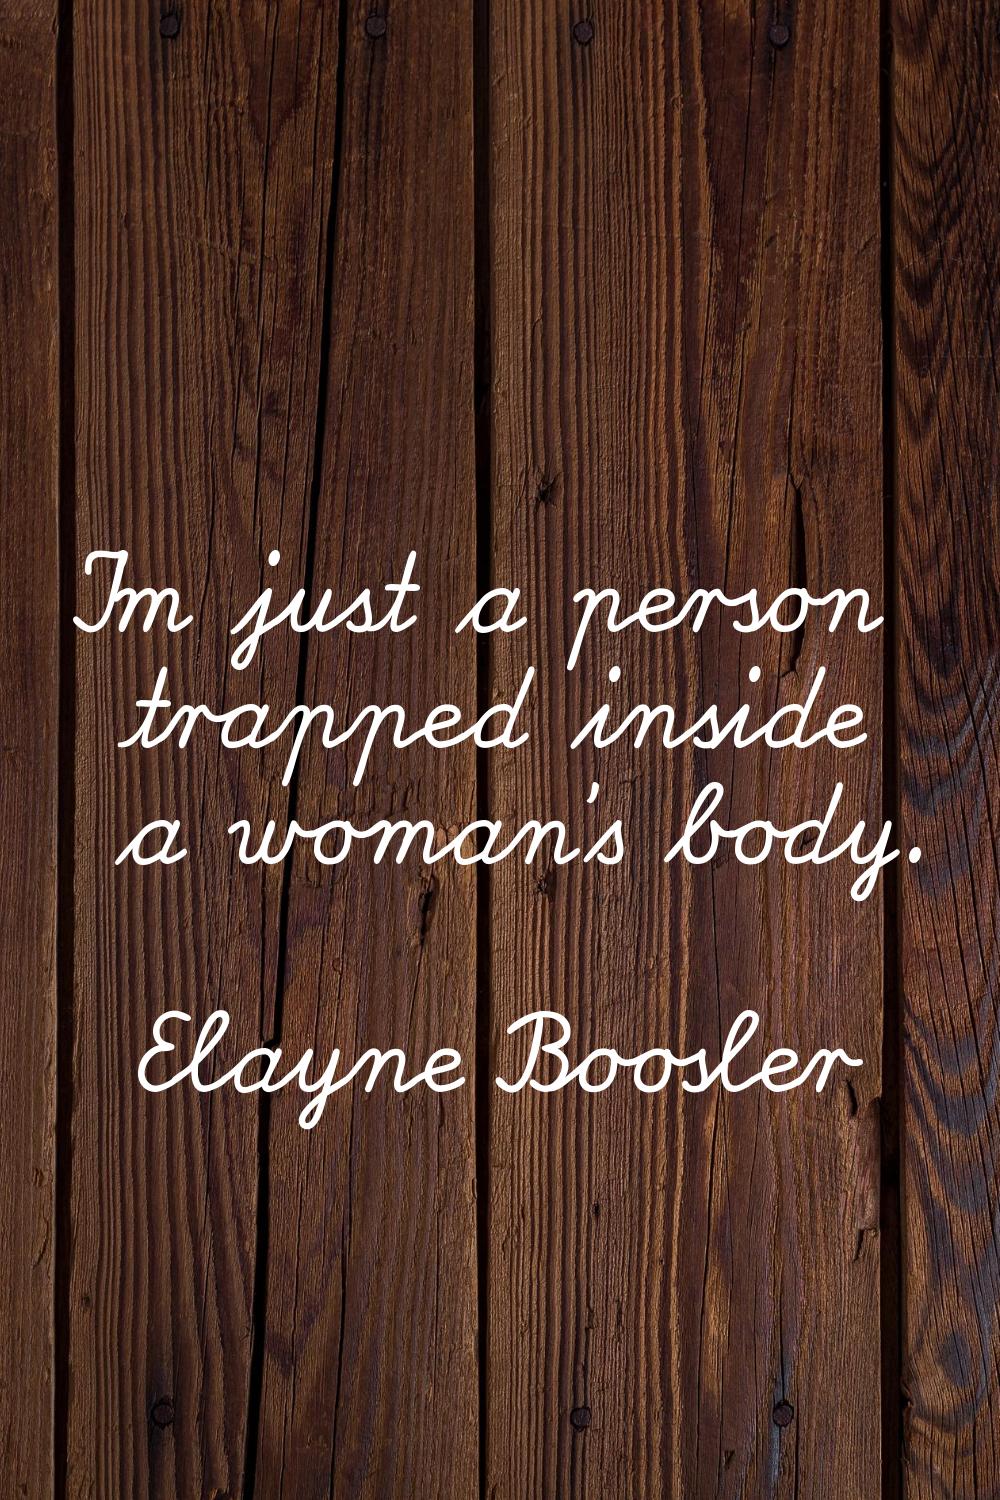 I'm just a person trapped inside a woman's body.